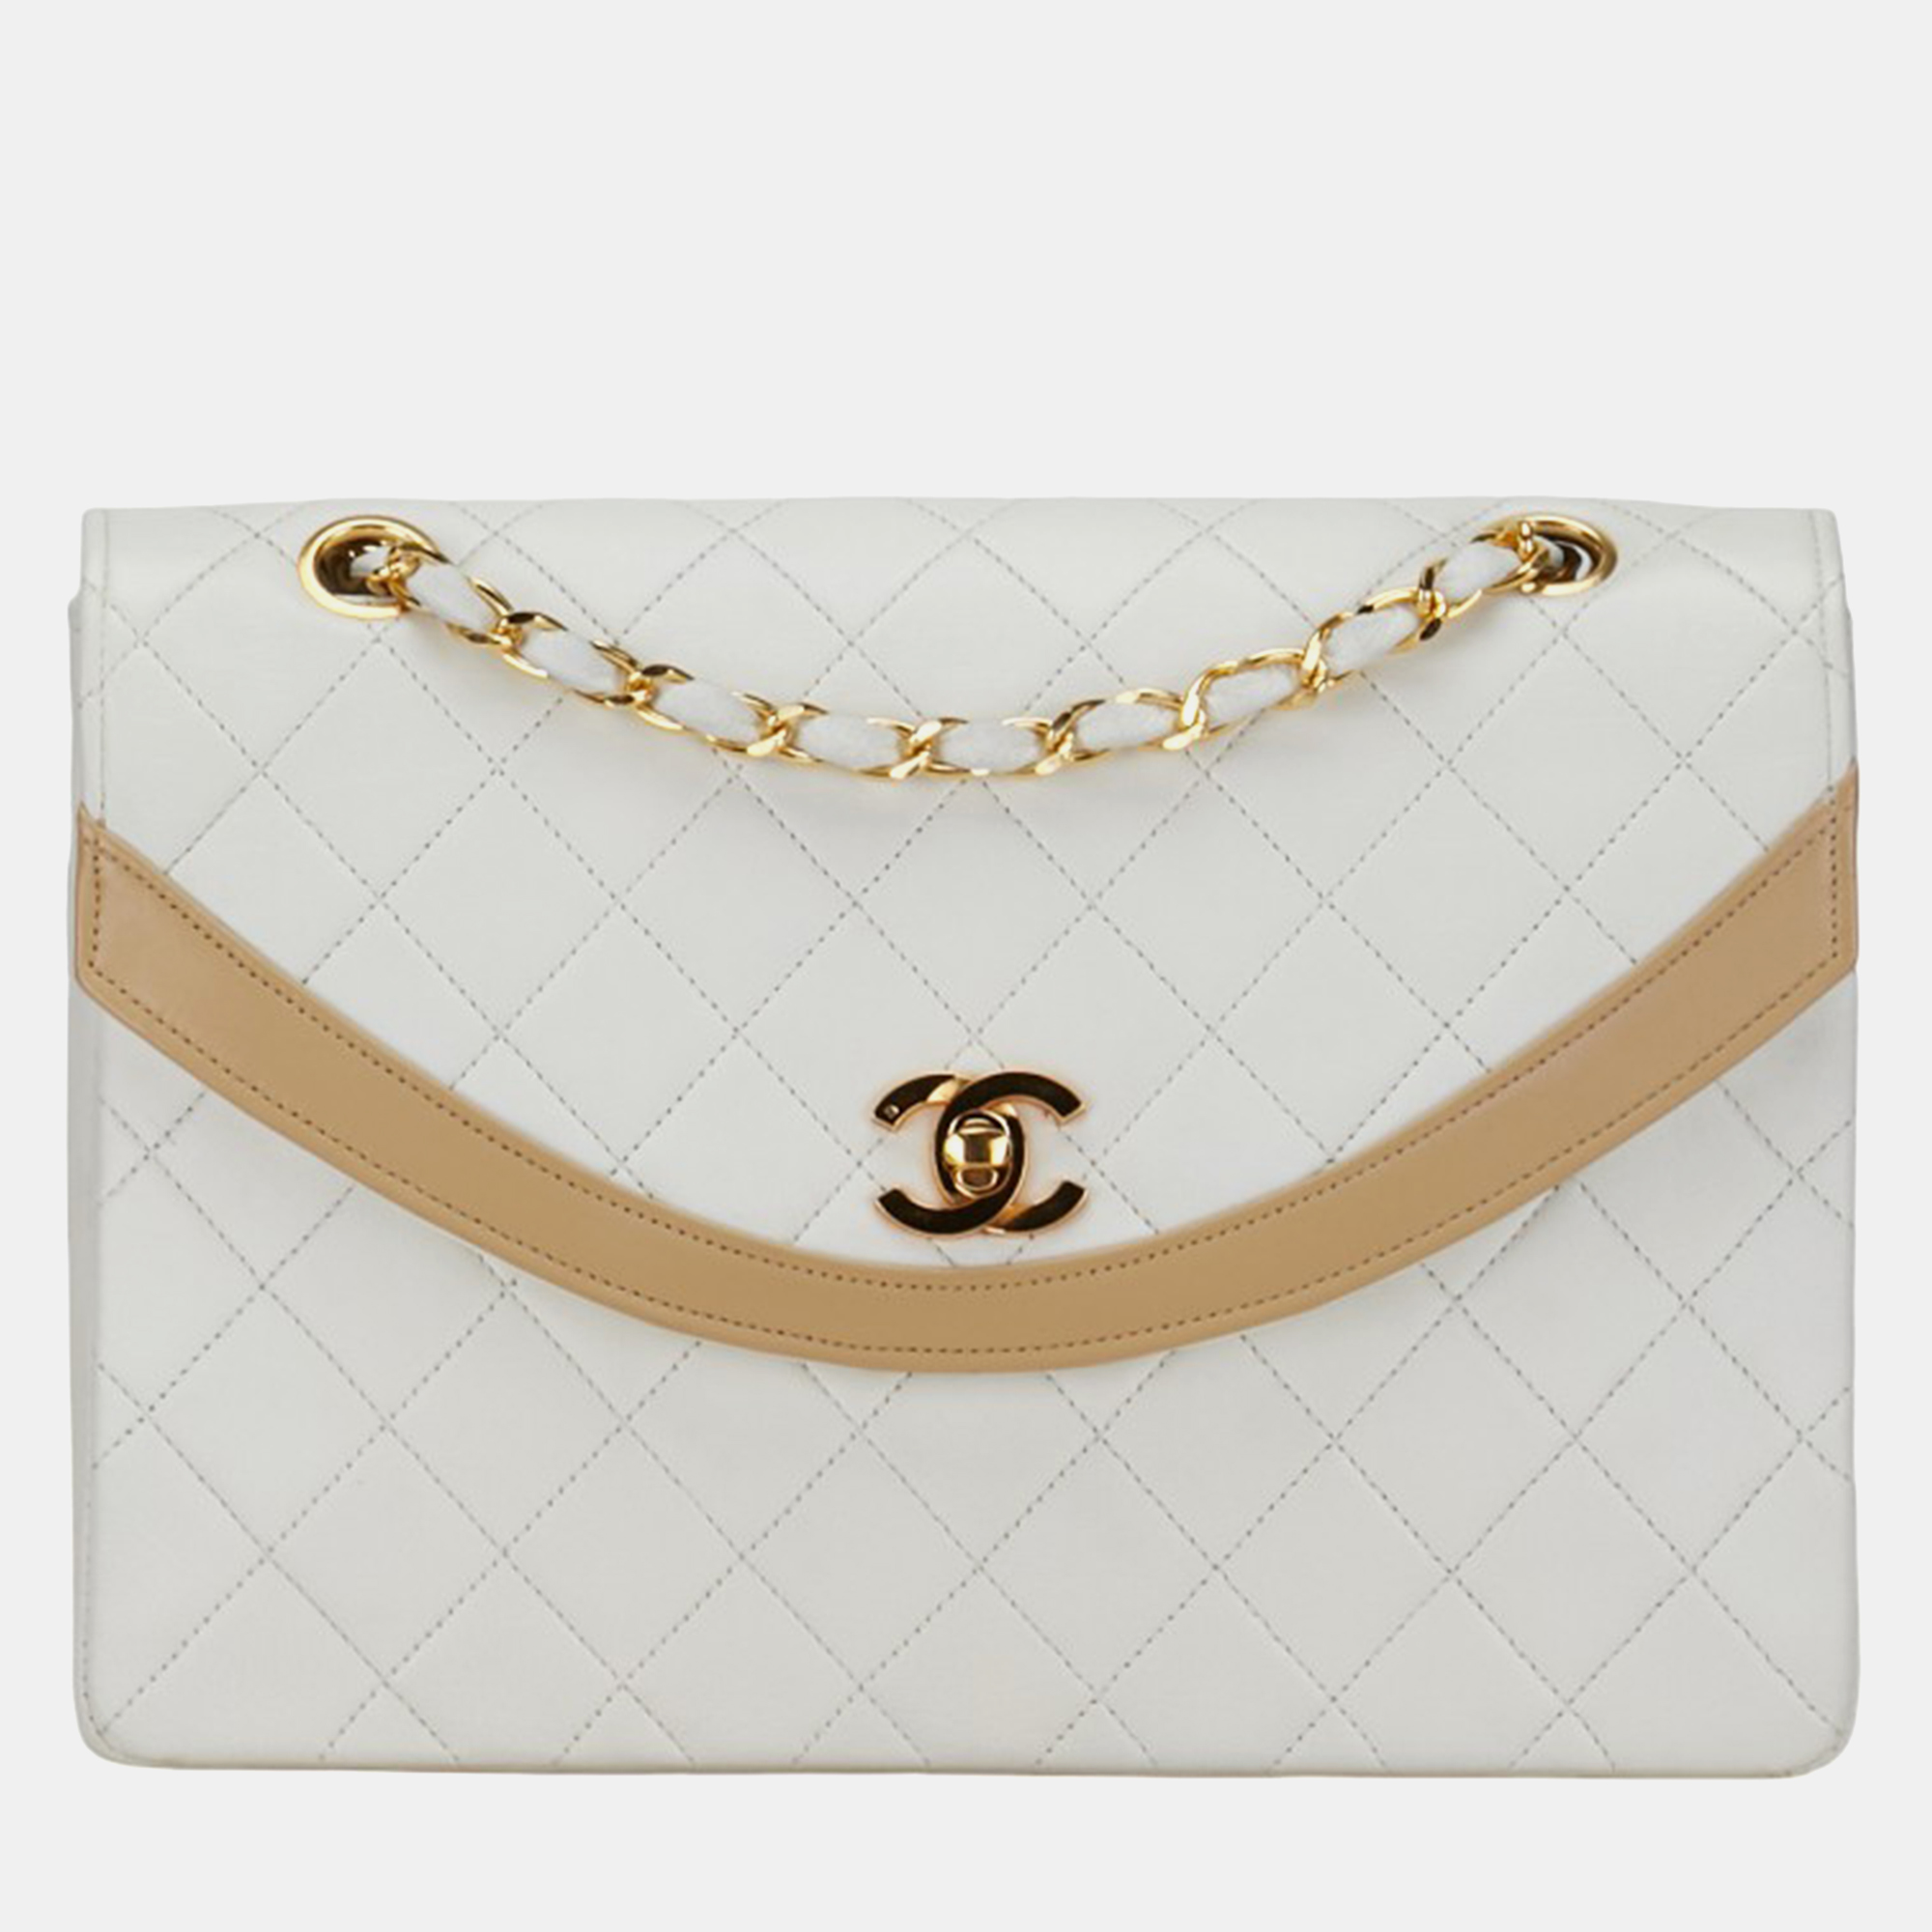 

Chanel White Leather Diana CC Flap Bag